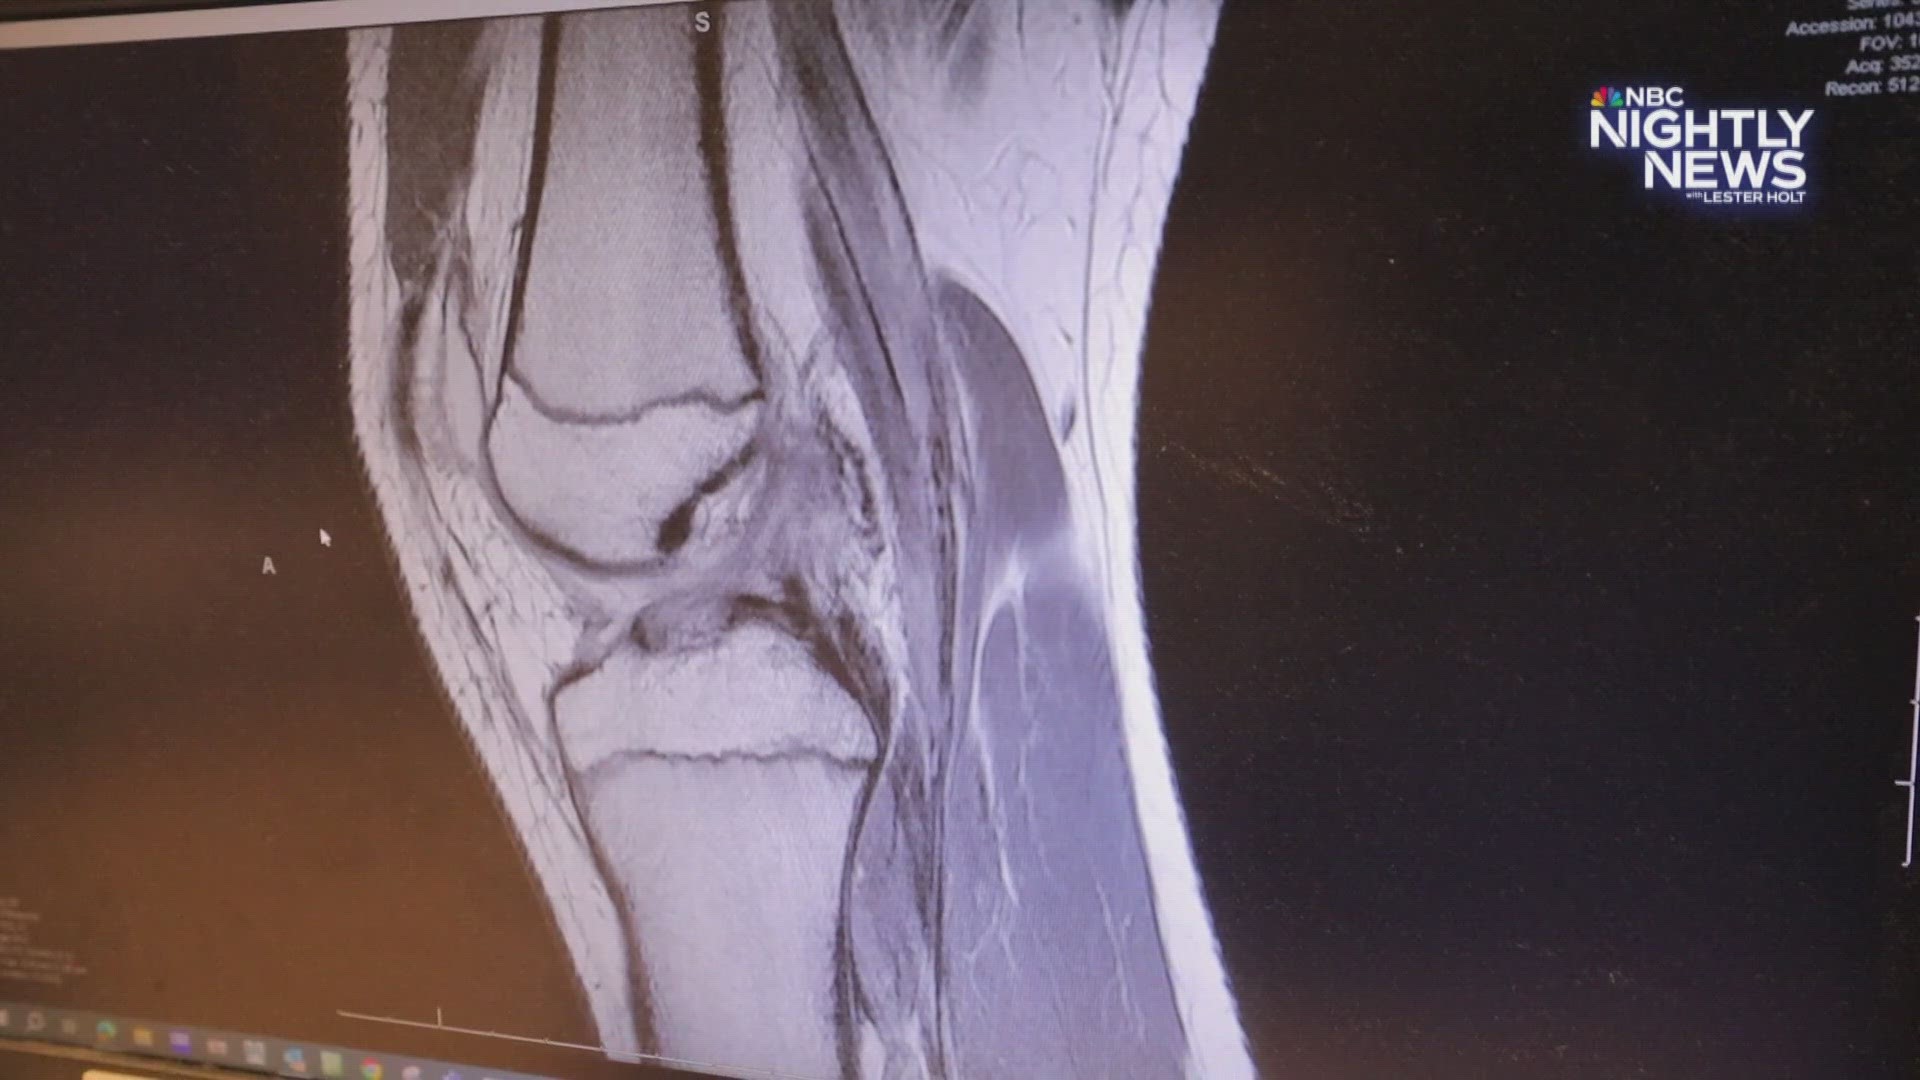 9Health Expert Dr. Payal Kohli discusses a new study on treatment for ACL tears.